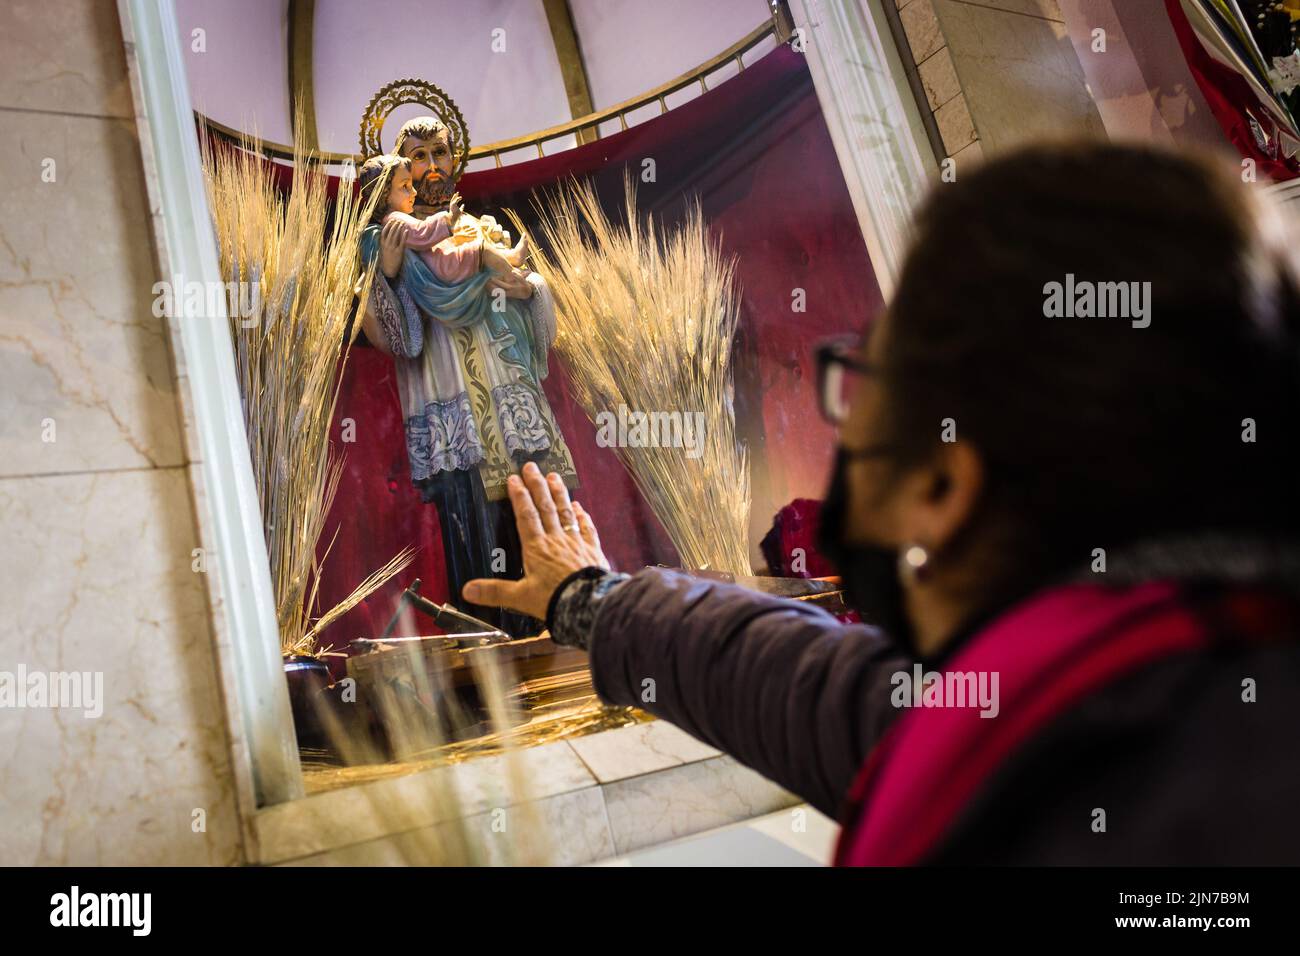 Buenos Aires, Argentina. 7th Aug, 2022. A woman approaches her hand to the image of San Cayetano while begging the Saint for bread, peace and work. After two years of pandemic, the great feast of San Cayetano was celebrated again in the church Santuario San Cayetano, in the cosmopolitan neighborhood Liniers of the city of Buenos Aires. As every August 7, many faithful could touch the image and venerate the Saint of Labor to ask for bread, peace and sustenance. (Credit Image: © Nacho Boullosa/SOPA Images via ZUMA Press Wire) Stock Photo